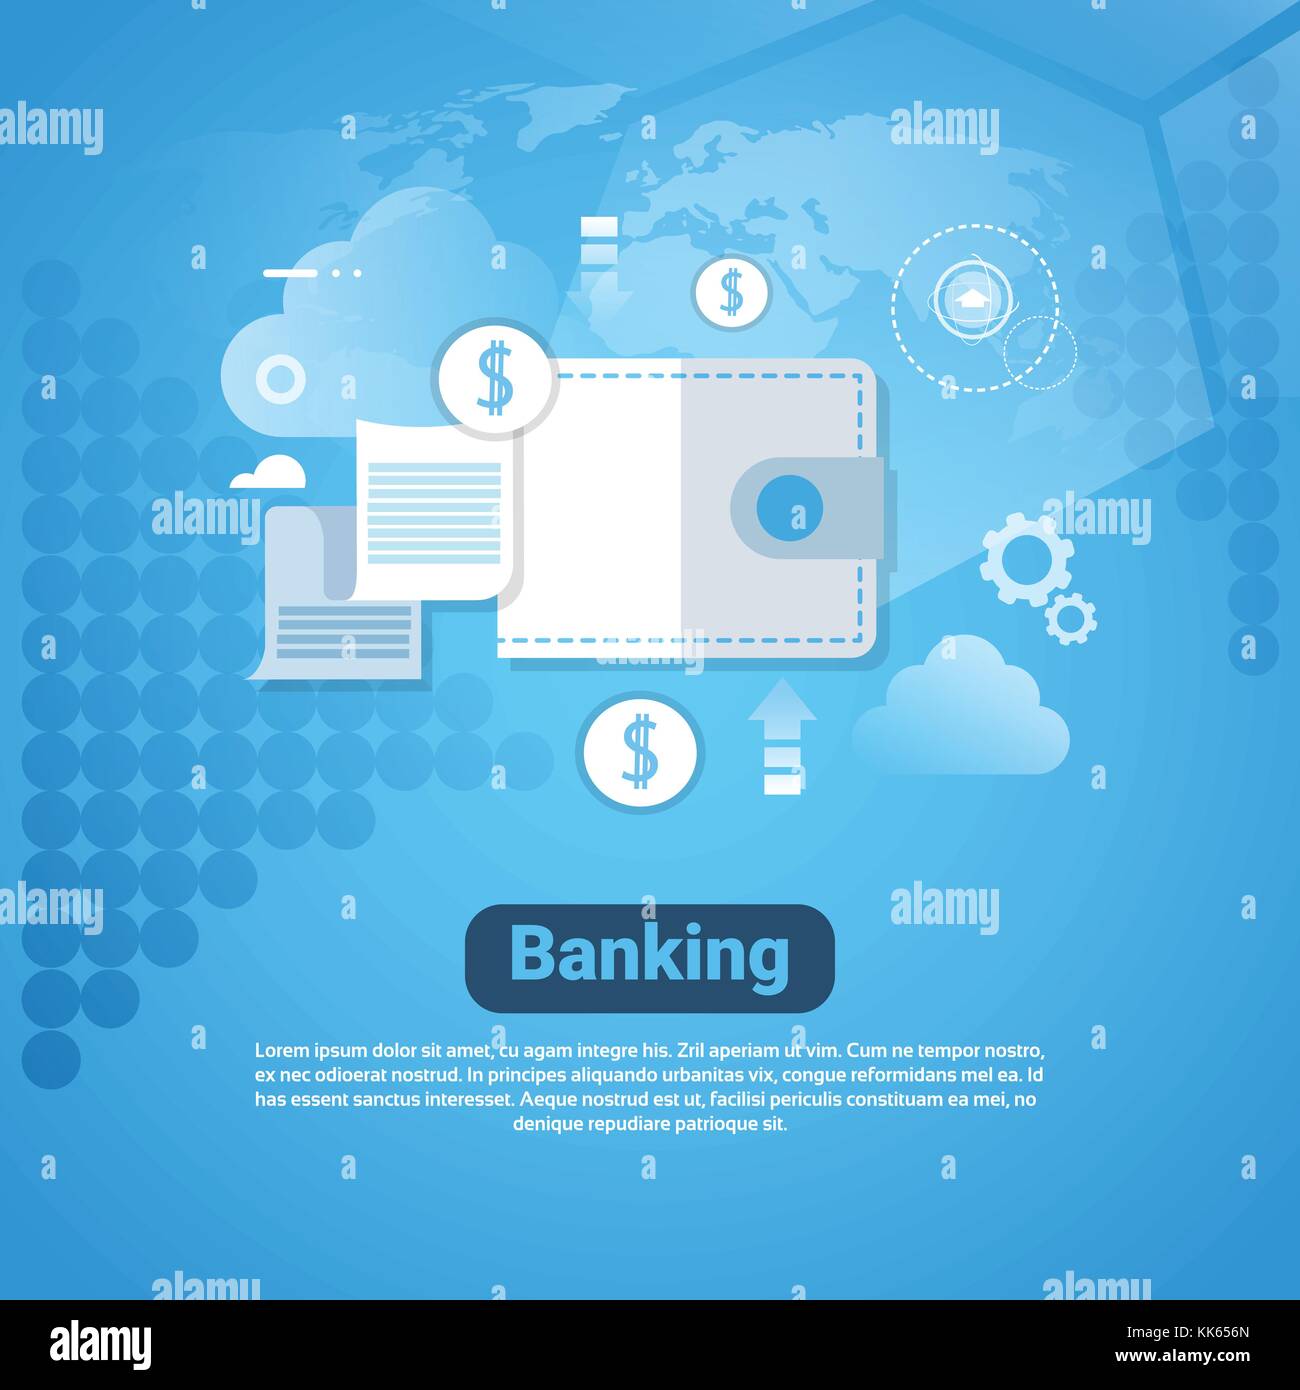 Banking Template Web Banner With Copy Space Money Savings Concept Stock Vector